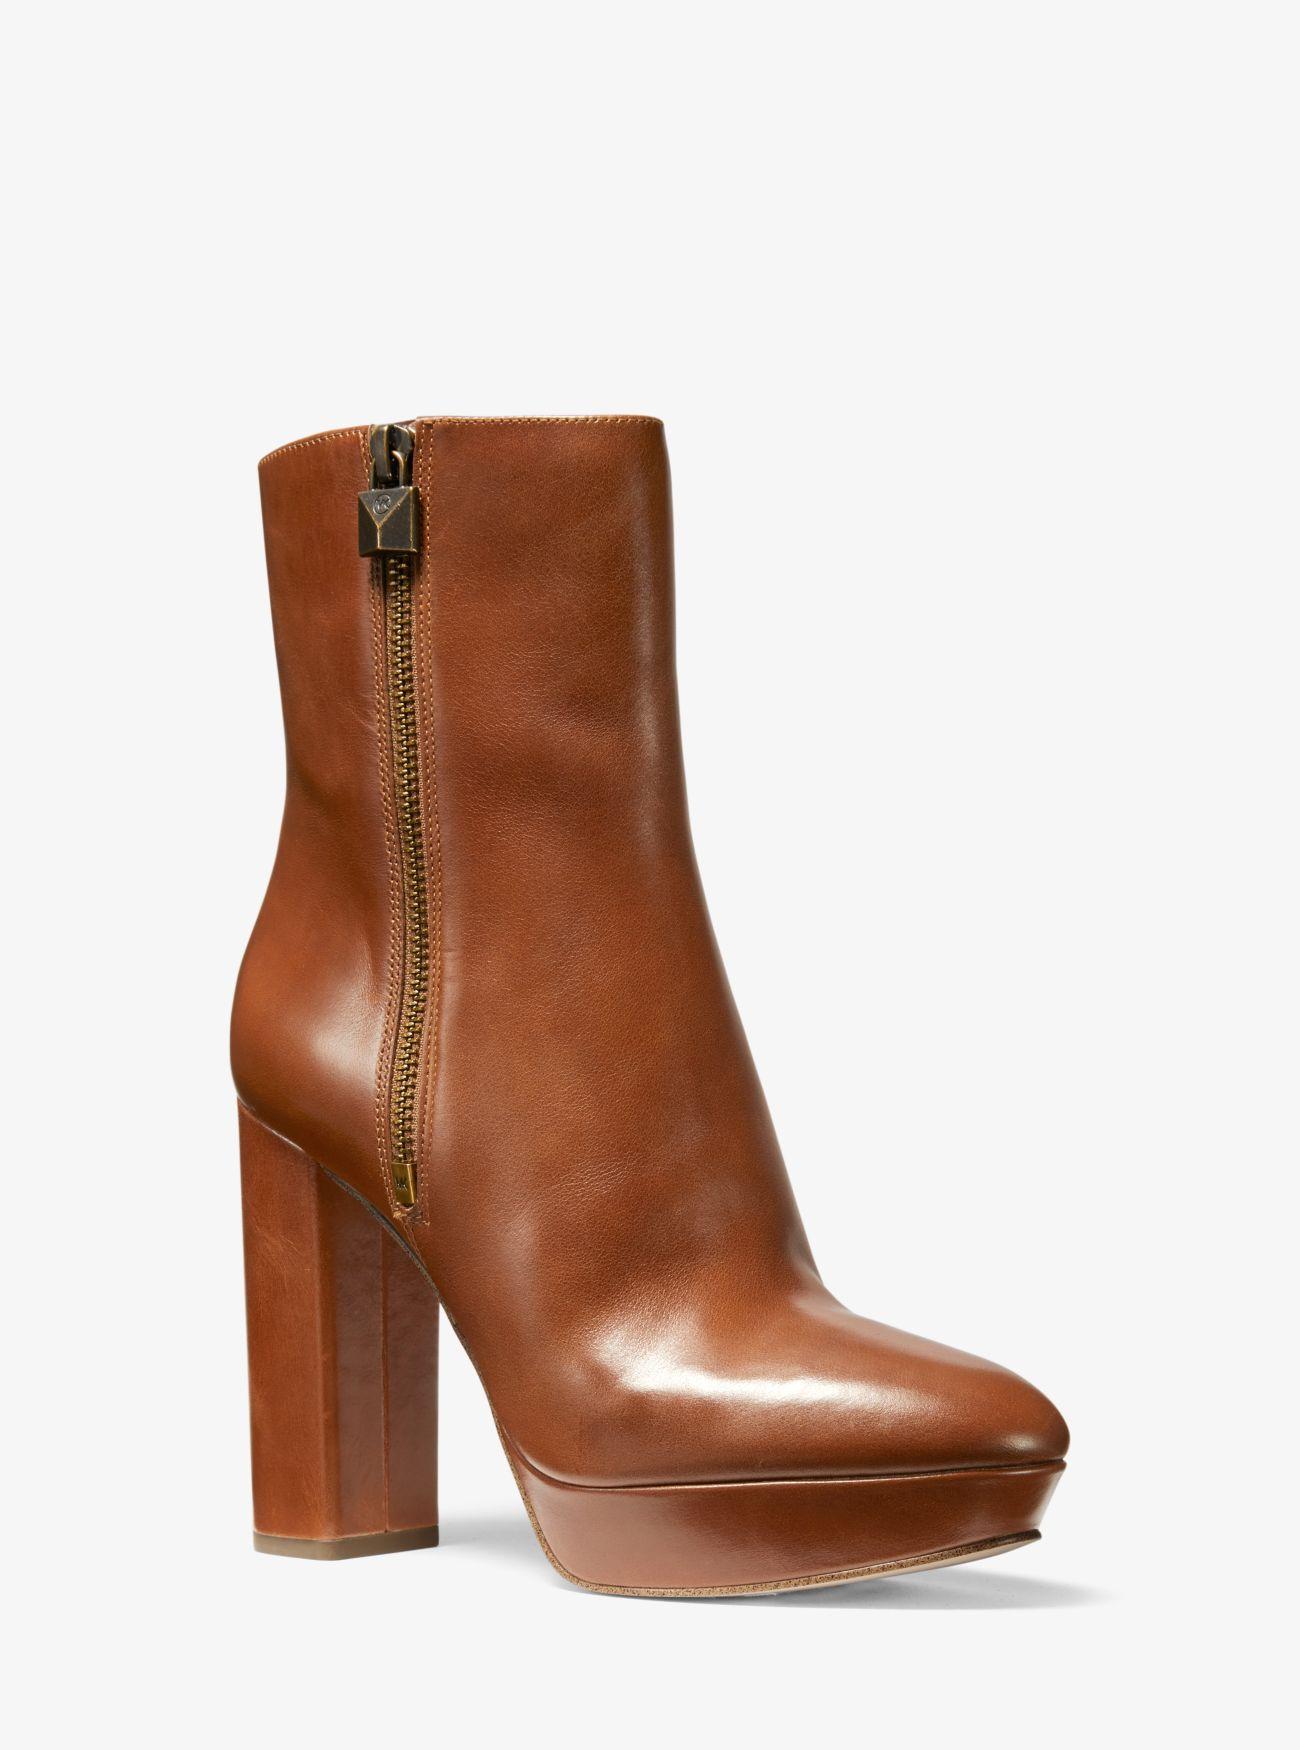 Michael Kors Frenchie Leather Platform Boot in Brown | Lyst